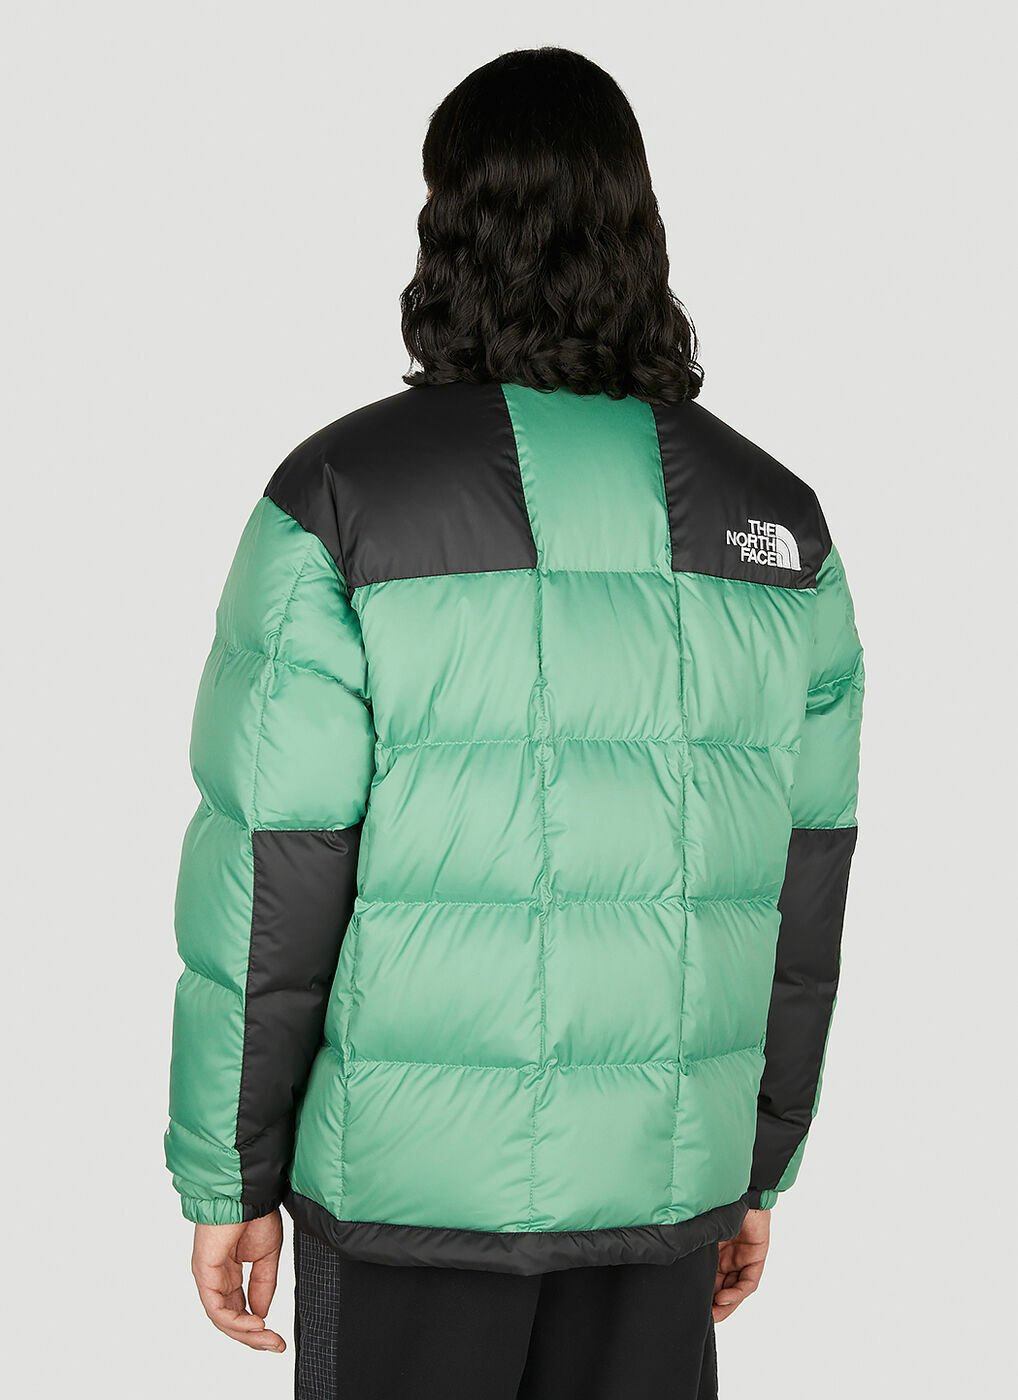 The North Face - Lhotse Jacket in Green The North Face